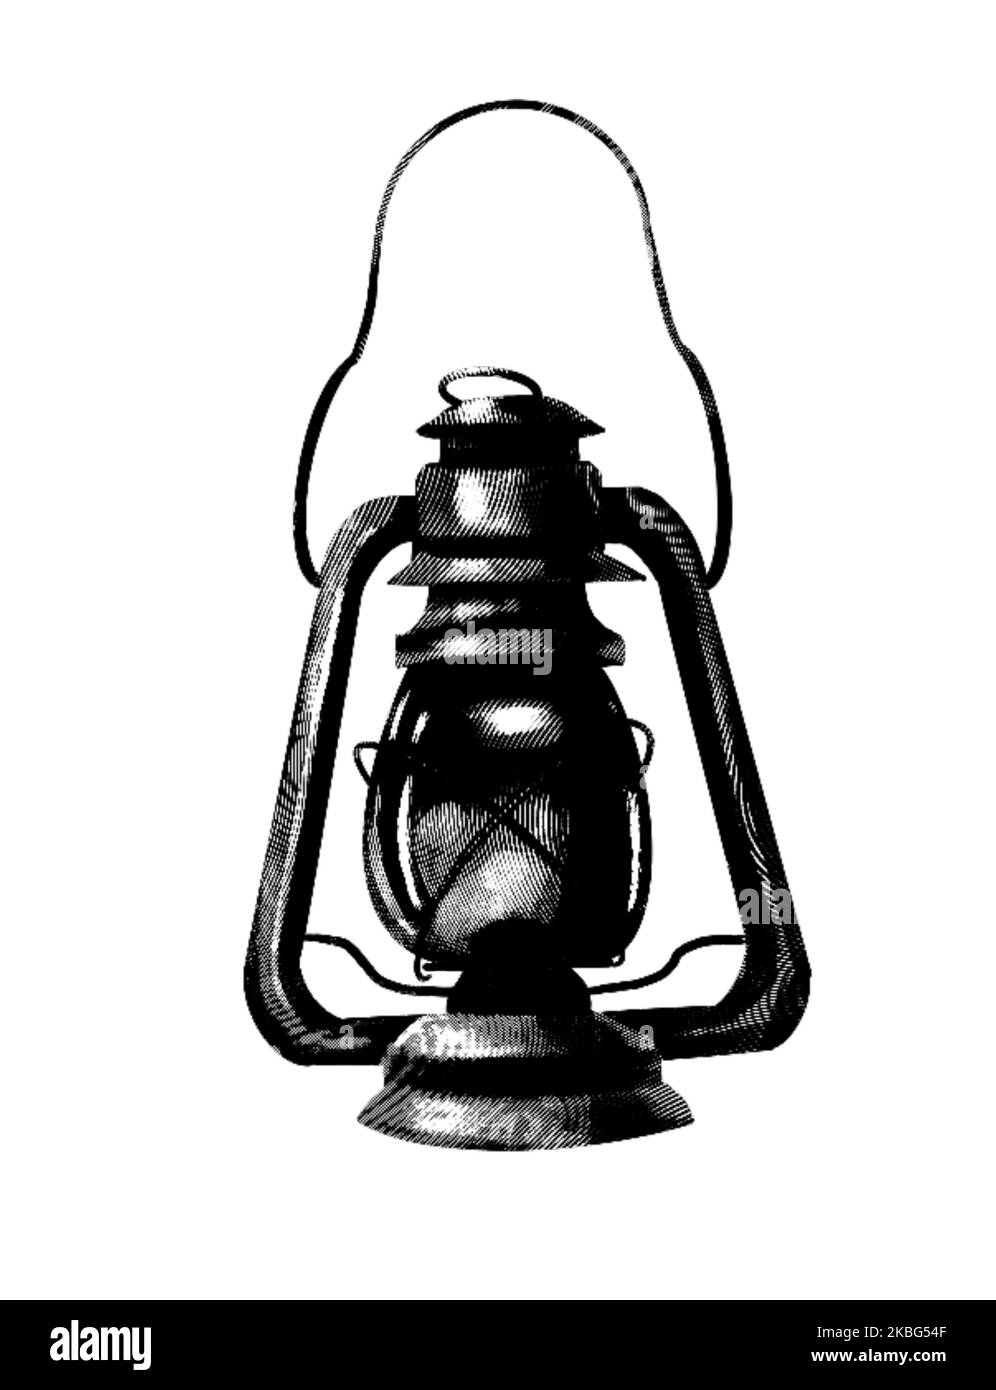 Engraving of a gas lamp. Realistic illustration of a gas lamp. Black and white drawing Stock Photo